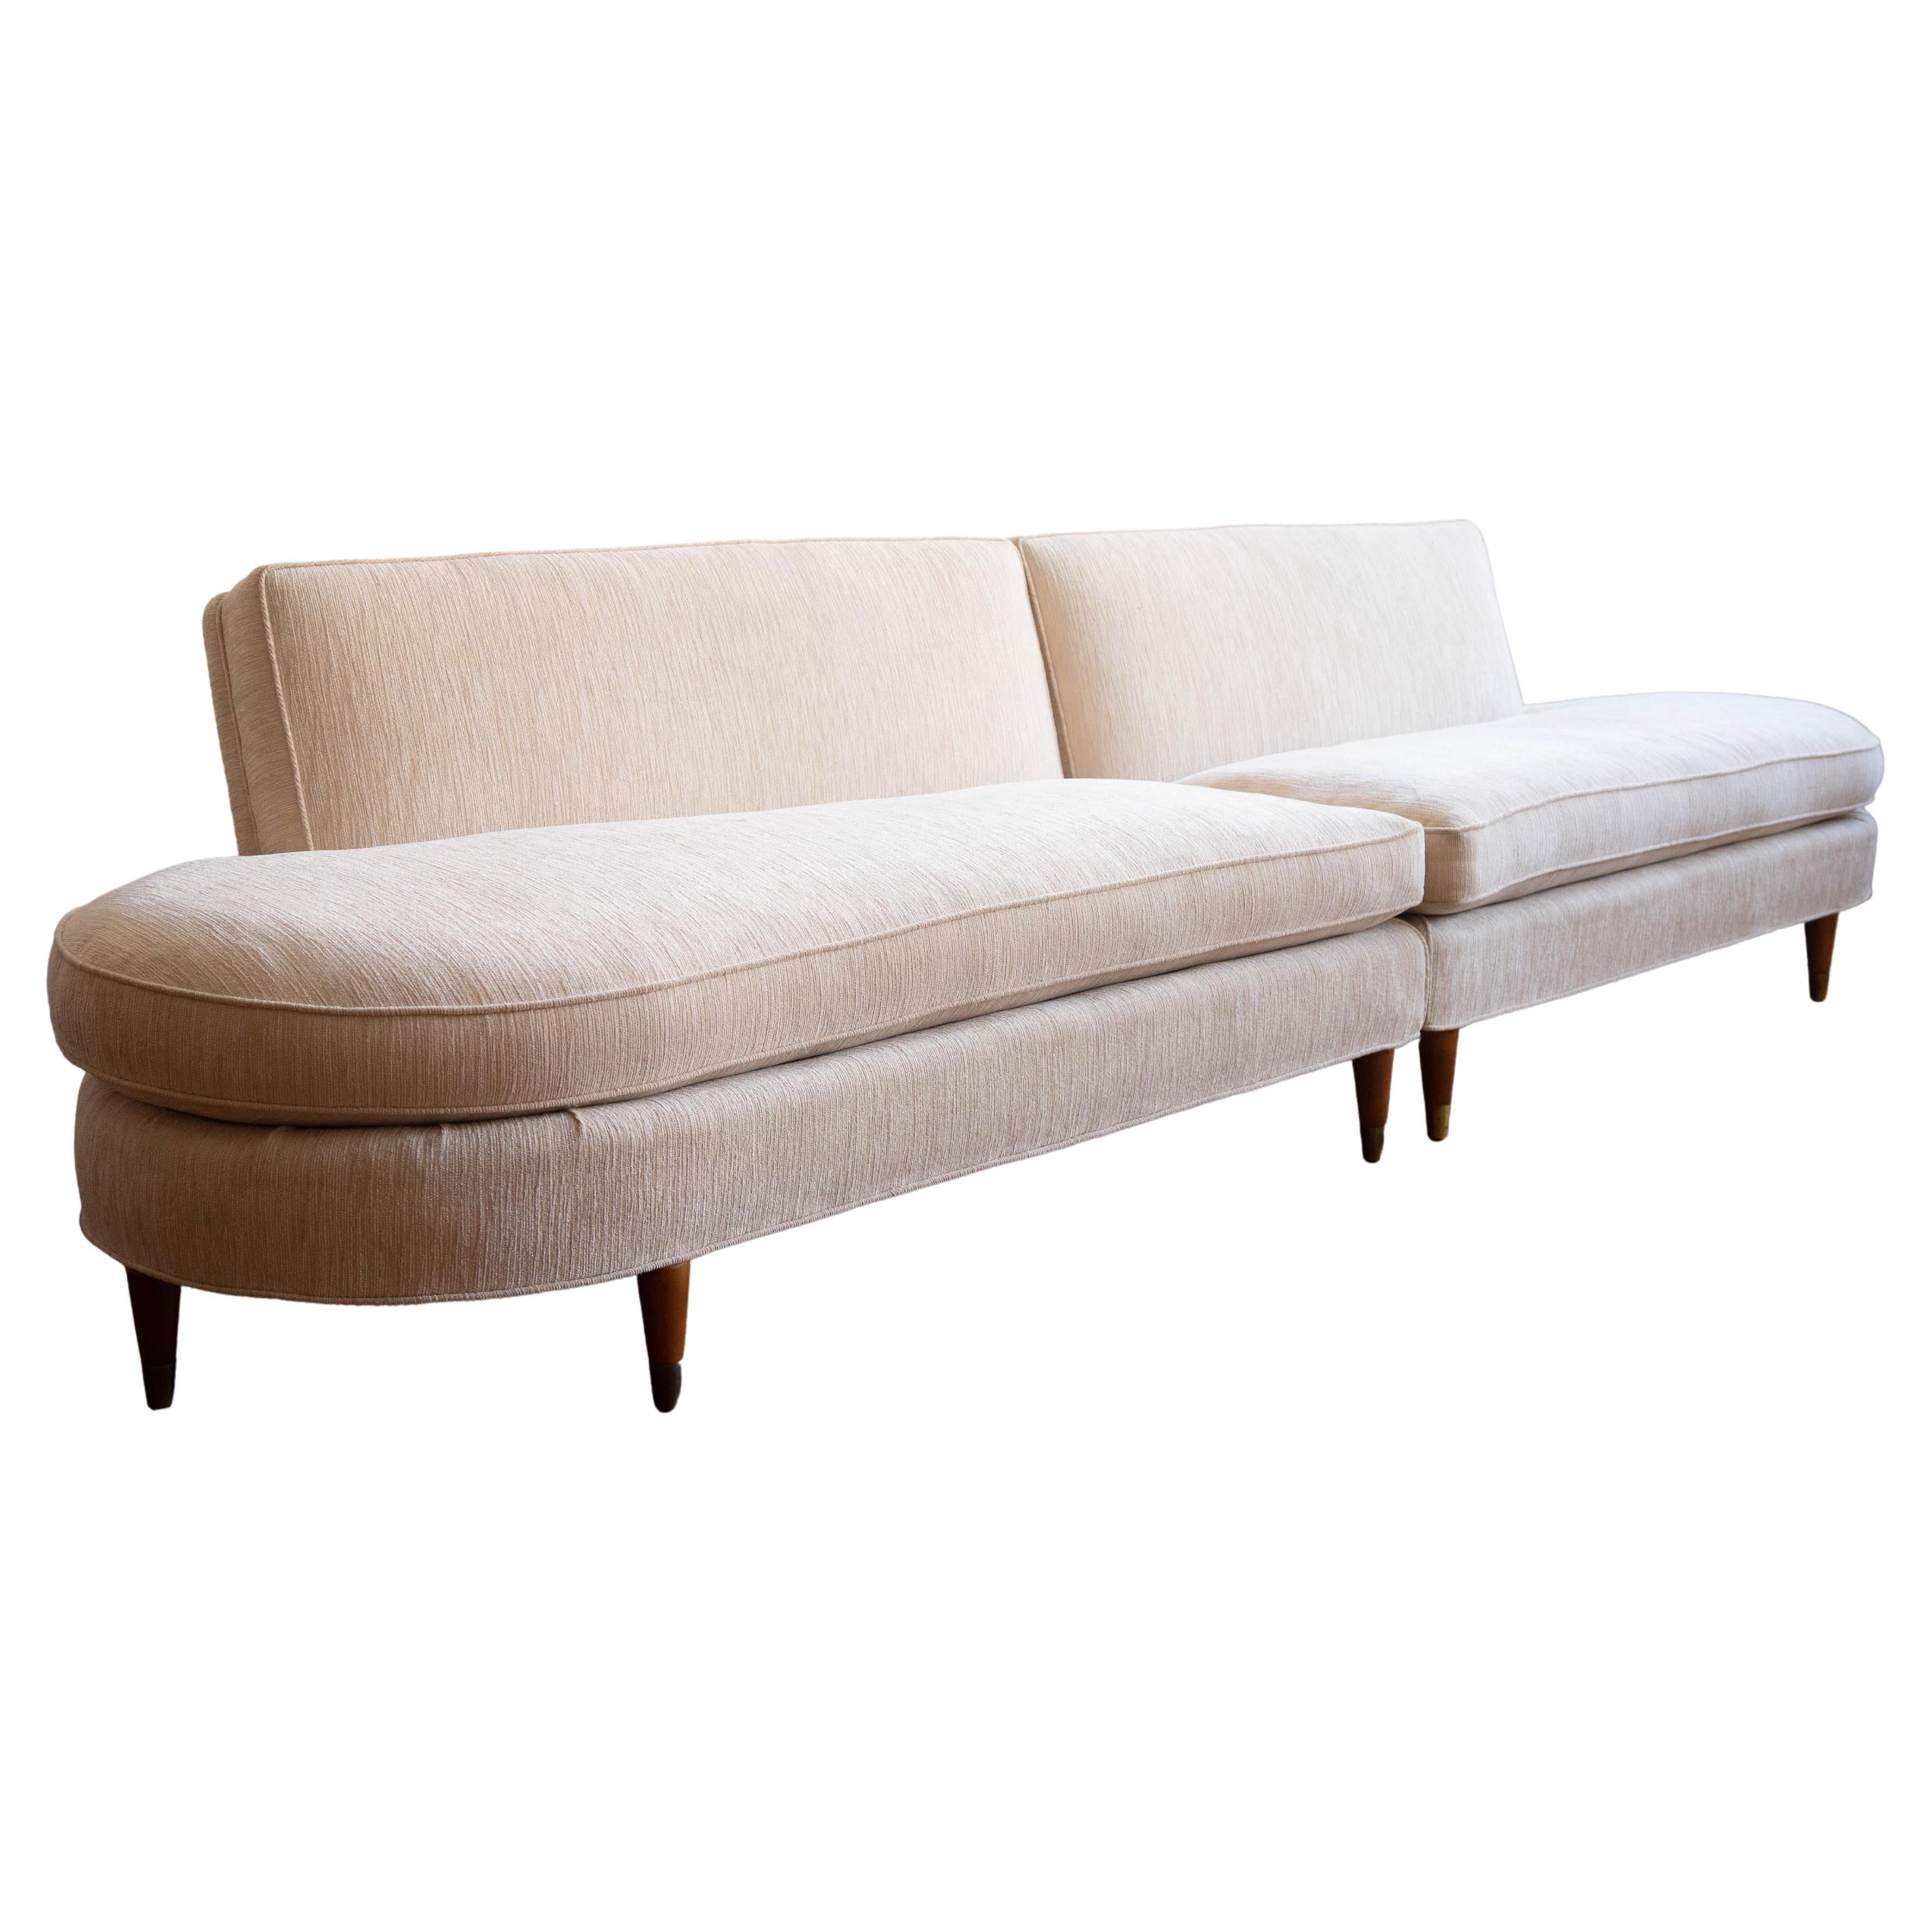 Relax in luxurious, vintage-inspired style with this two-piece curved sectional sofa! Crafted with off-white textured velvet fabric and wood tapered brass-capped legs, this living room staple gives you all the cozy, midcentury vibes you love. Plus,